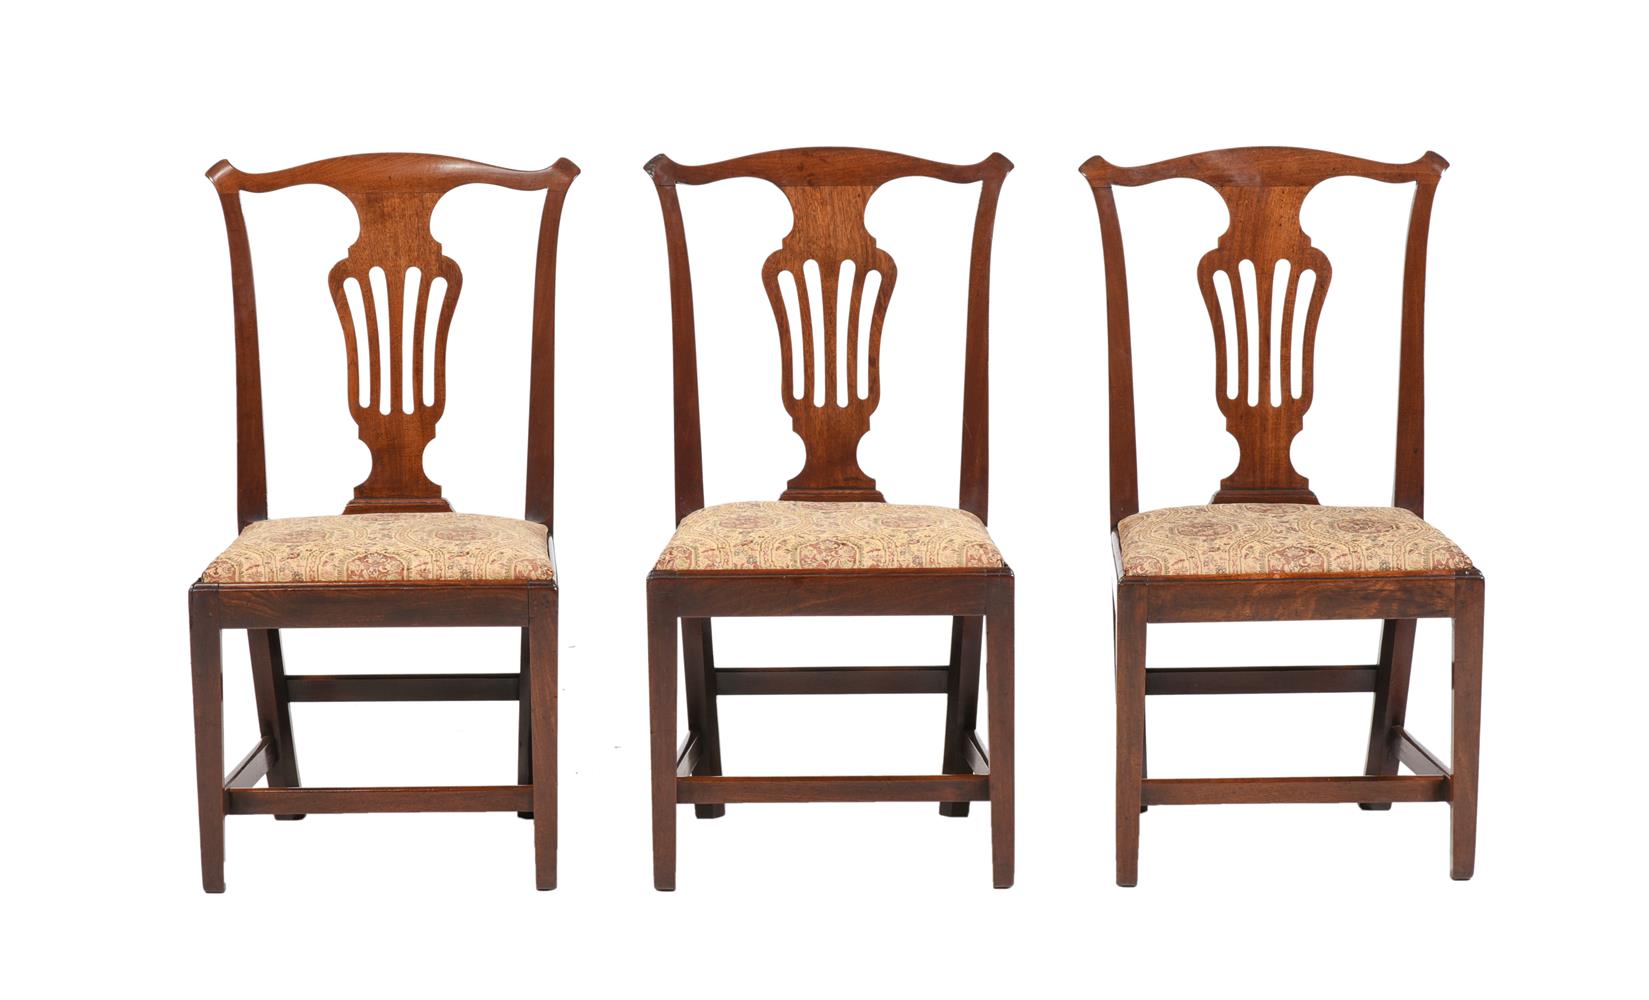 A SET OF SIX GEORGE III MAHOGANY DINING CHAIRS, CIRCA 1780 - Image 3 of 3